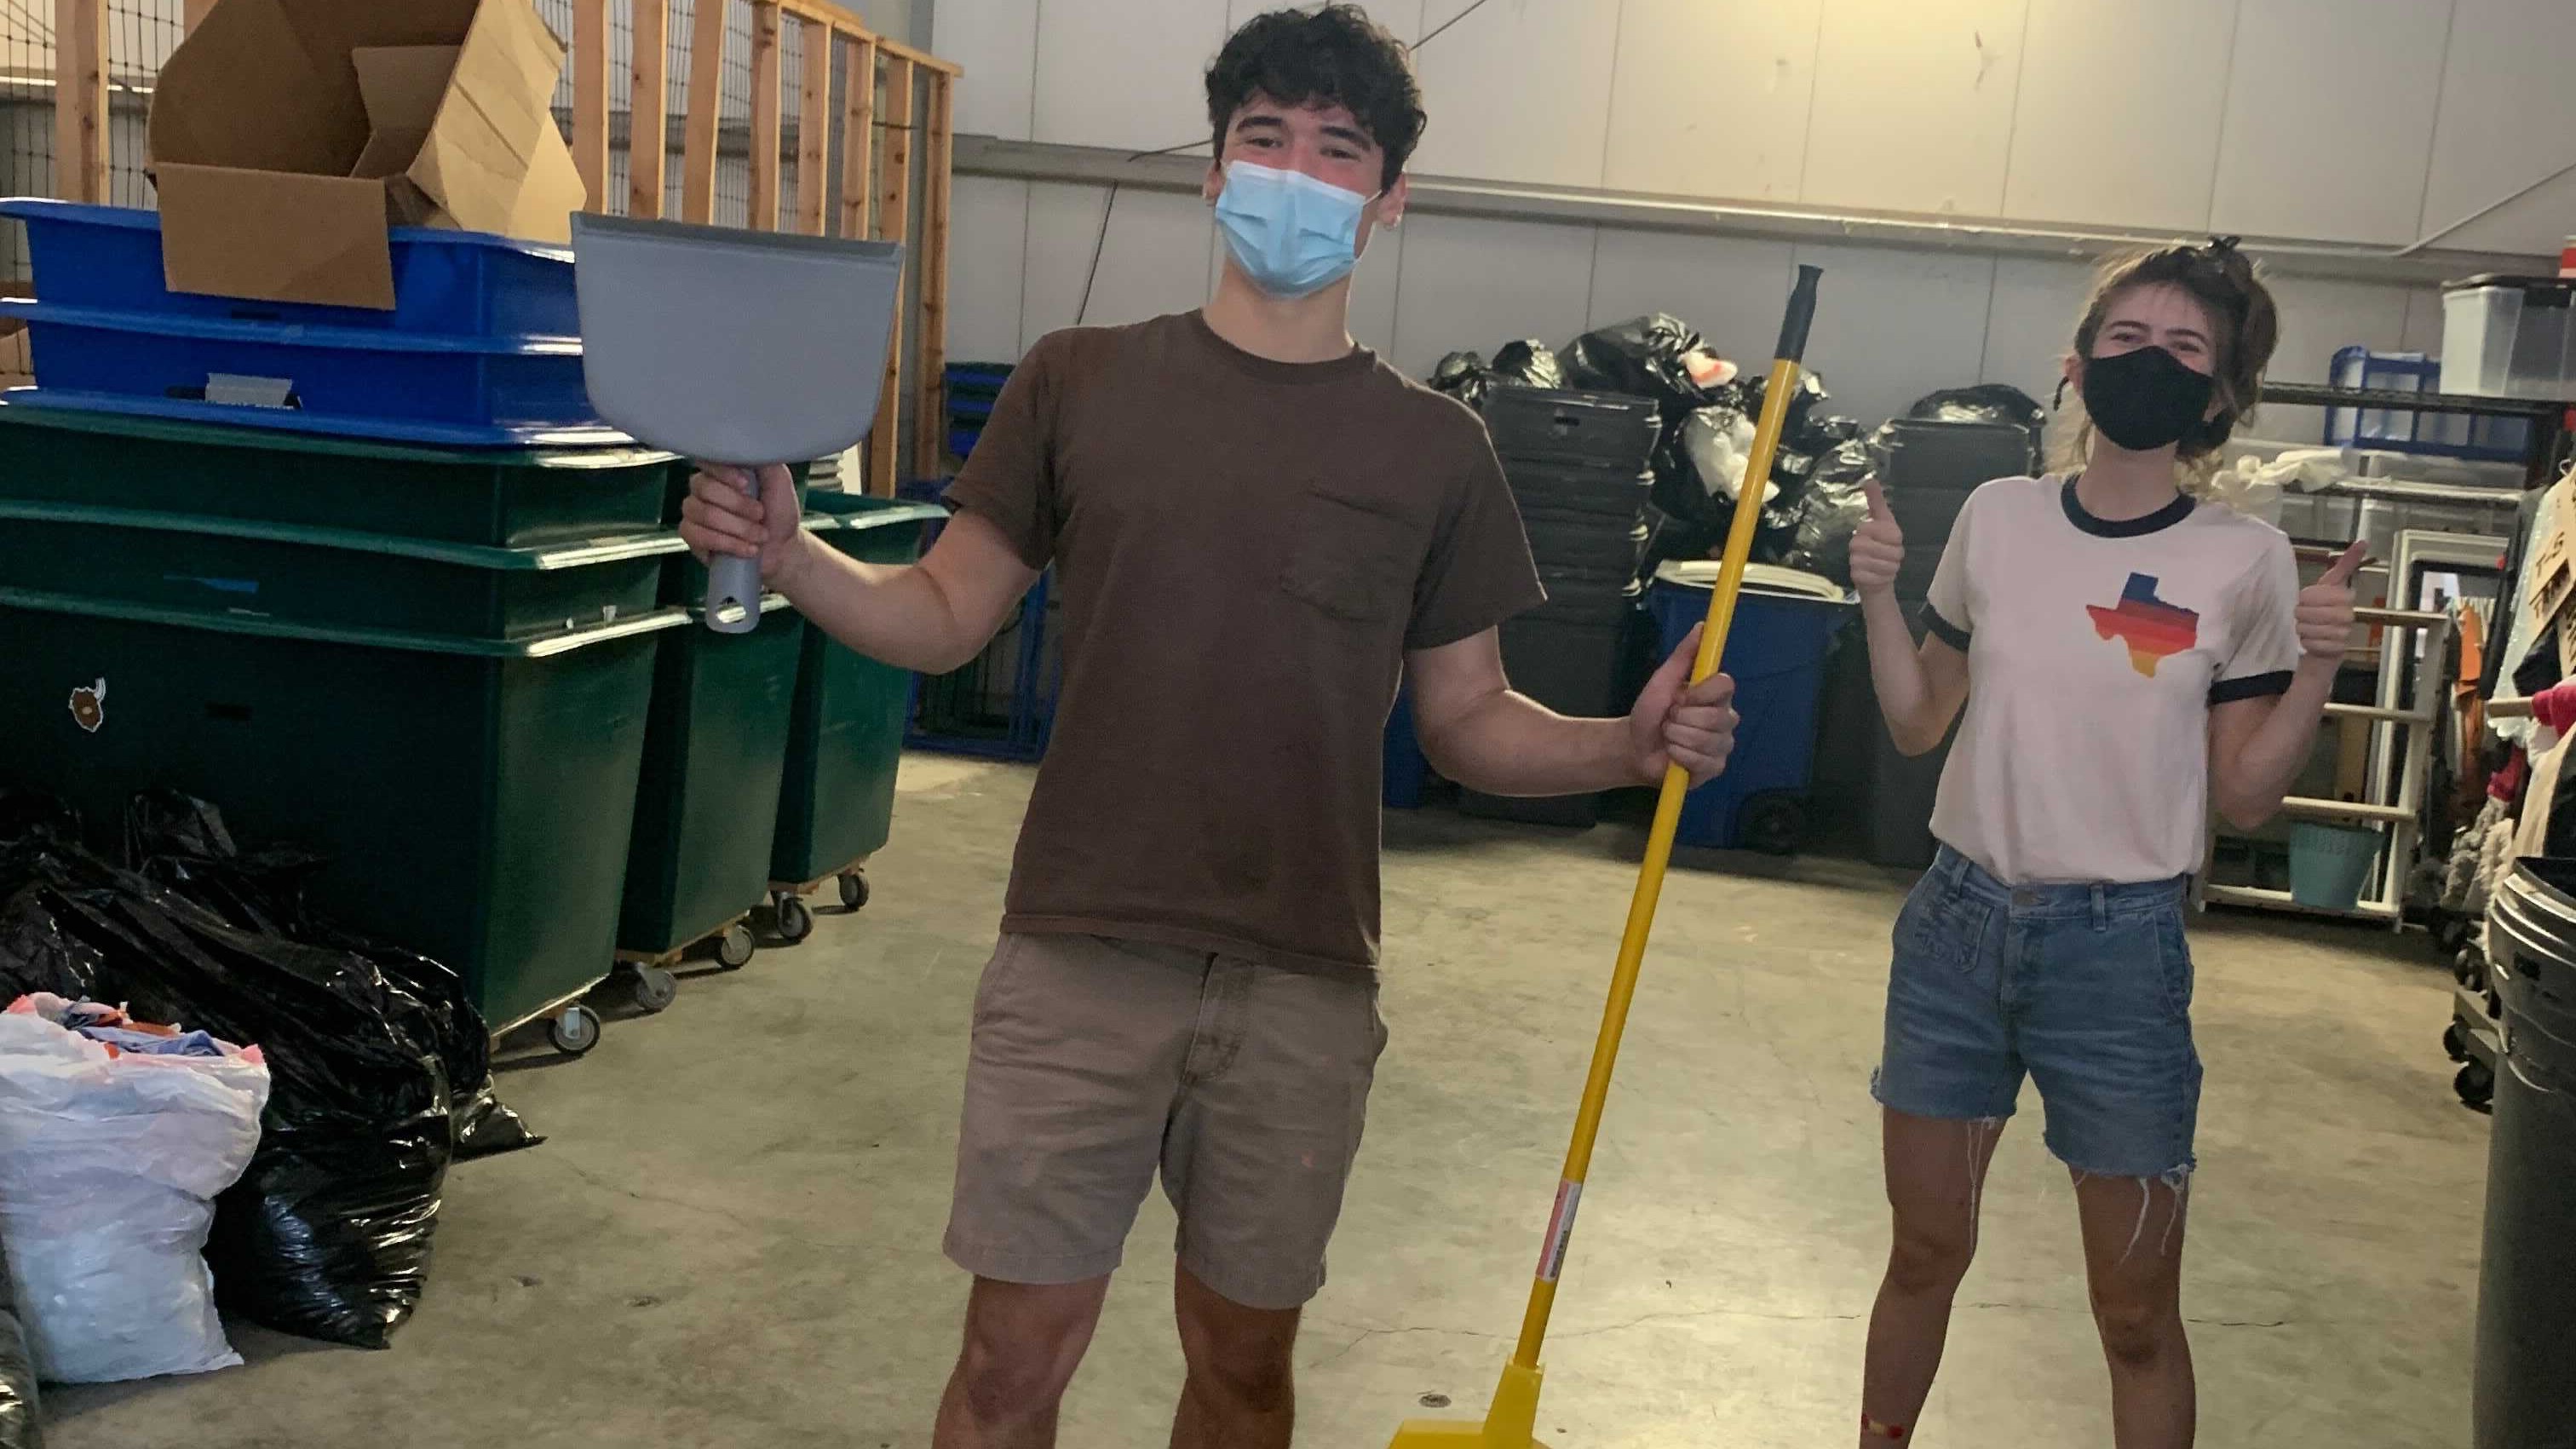 Two students stand smiling beneath their masks in a large open storage unit. One student holds a dustpan and broom and the other is giving two thumbs up.